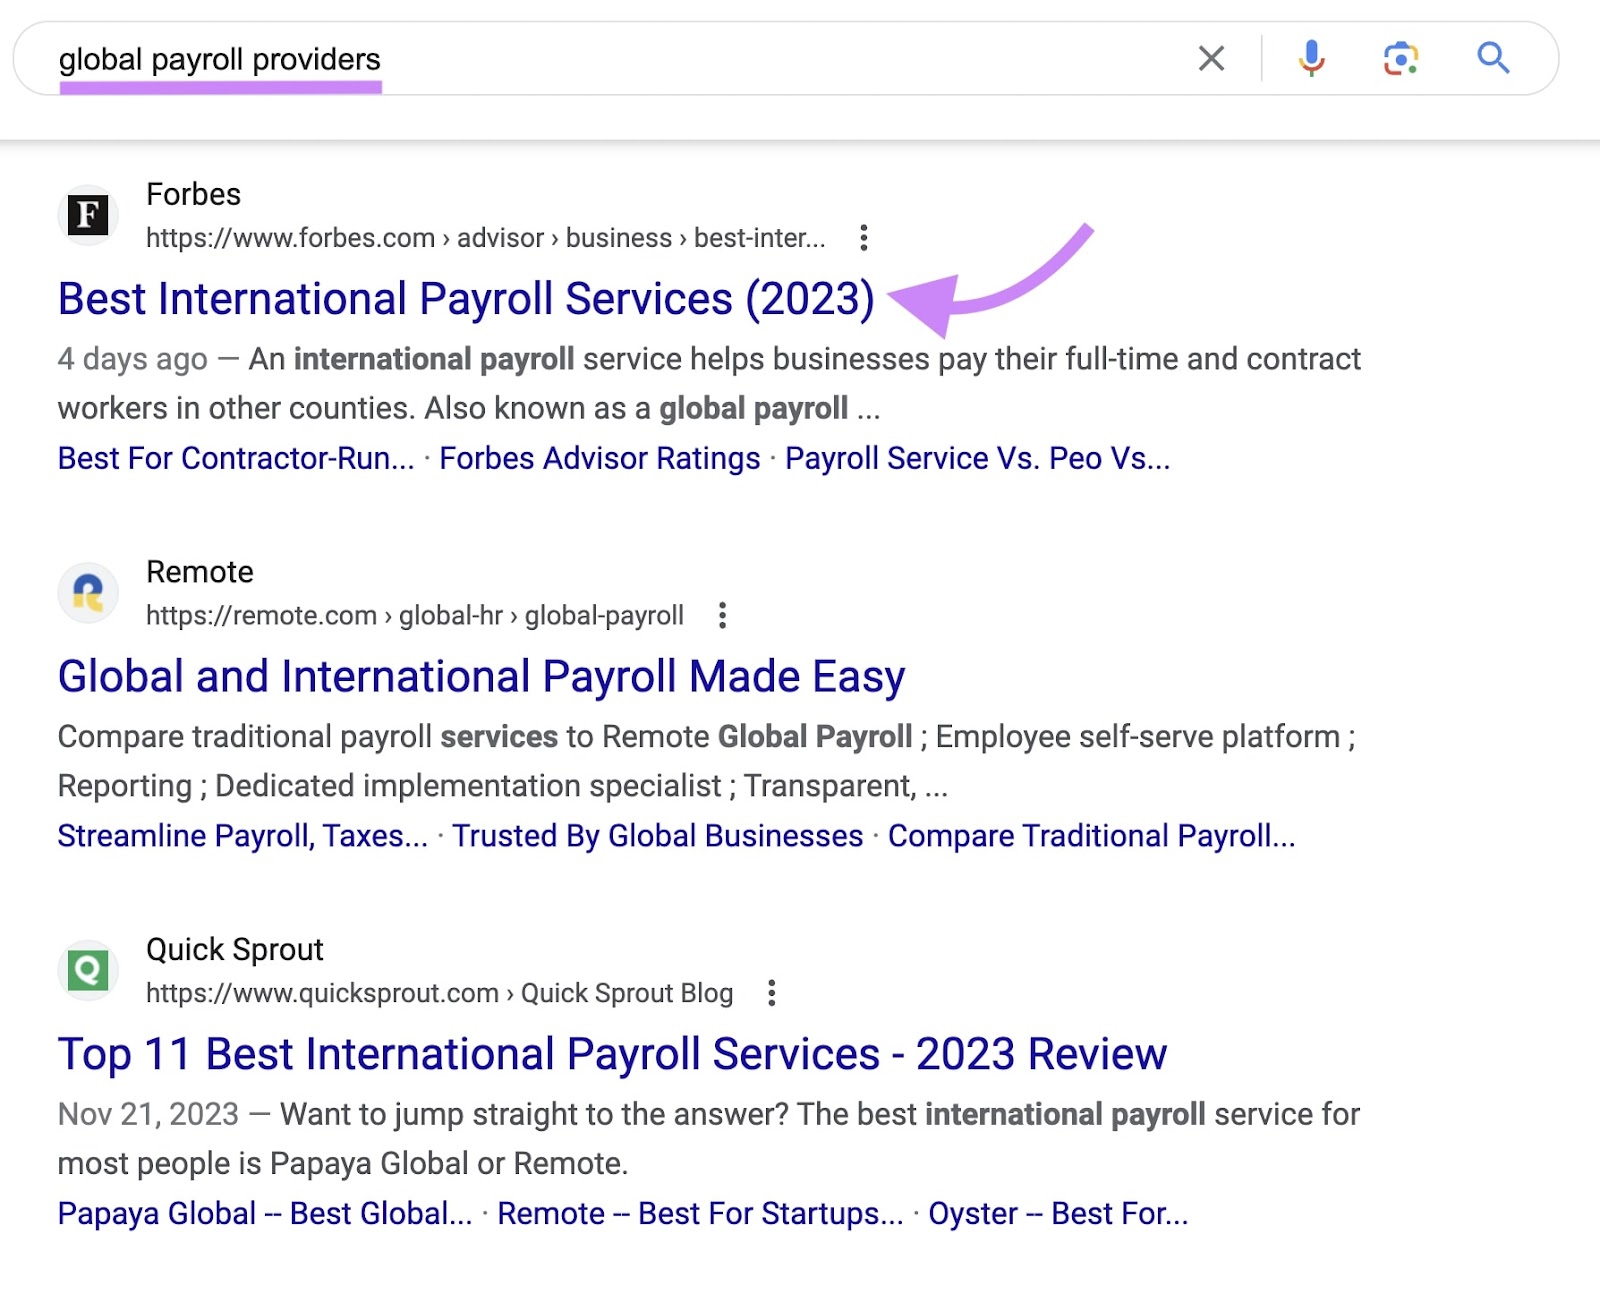 Google's SERP for “global payroll providers" query